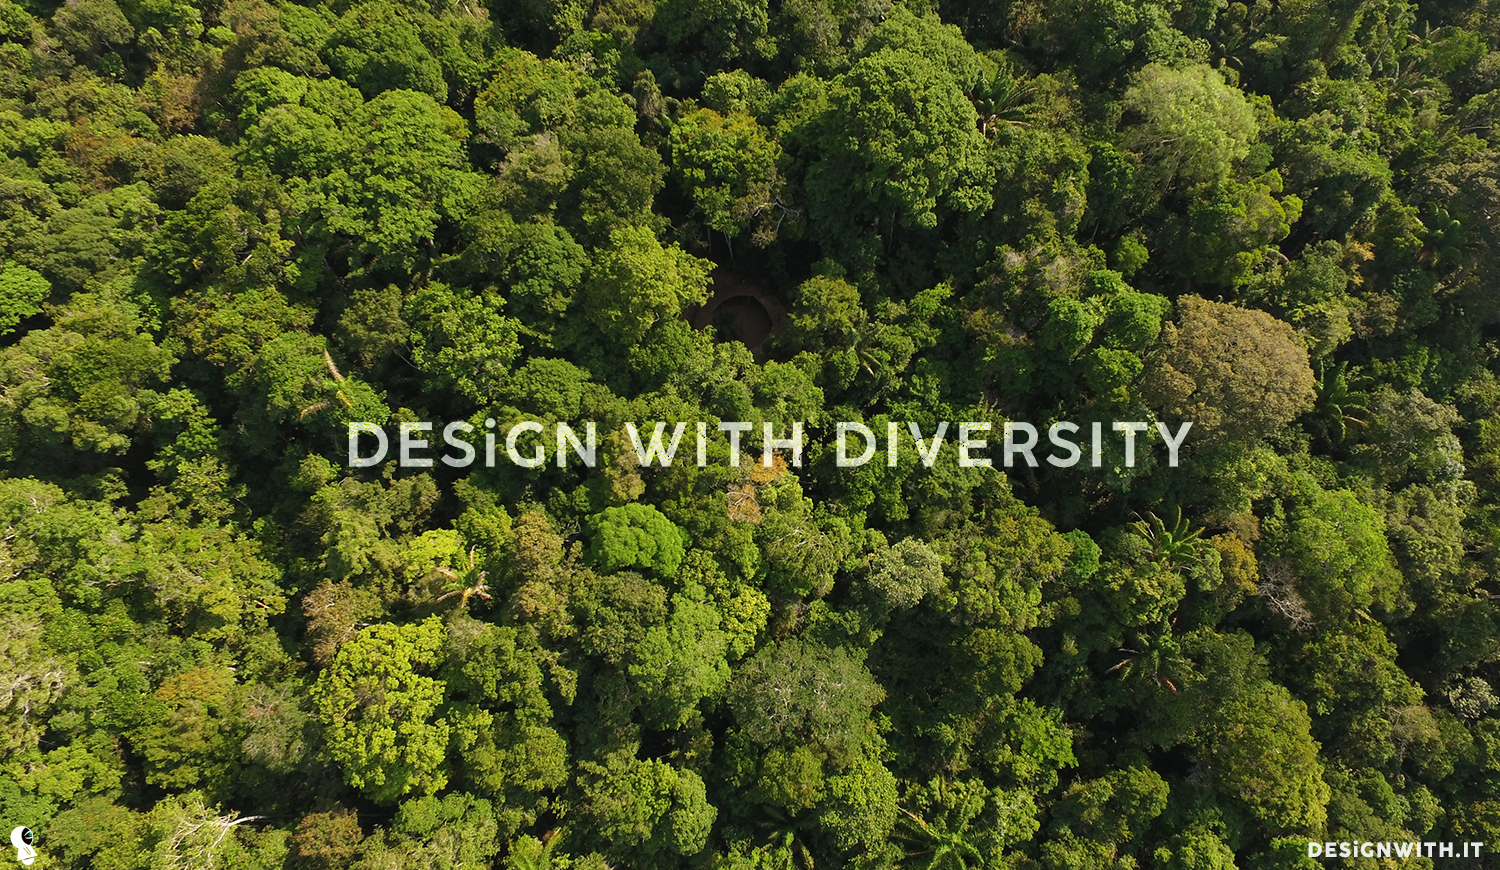 Design with diversity. Design with it!